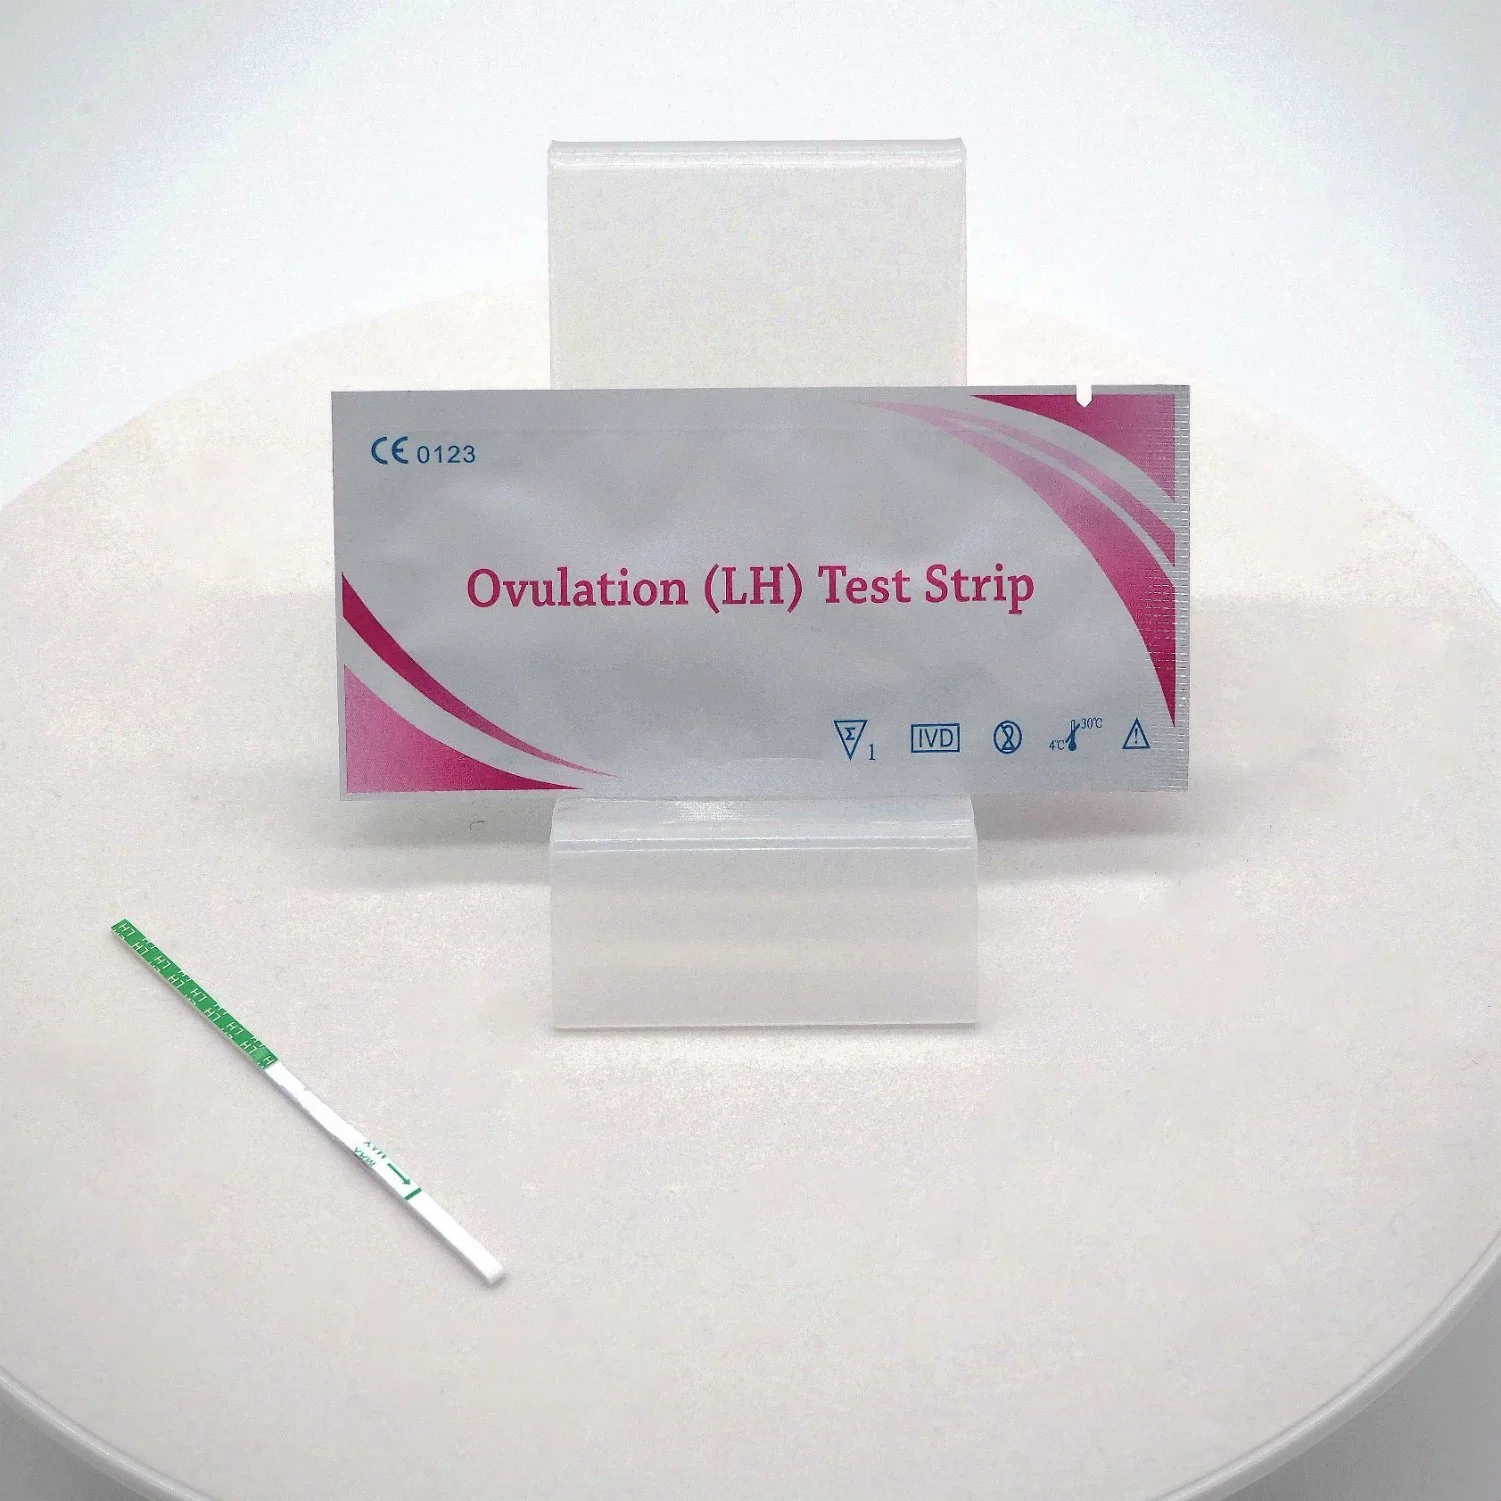 Rapid Test Home Use Pregnancy Fertility Hormones Test Lh Ovulation Test Strip with CE